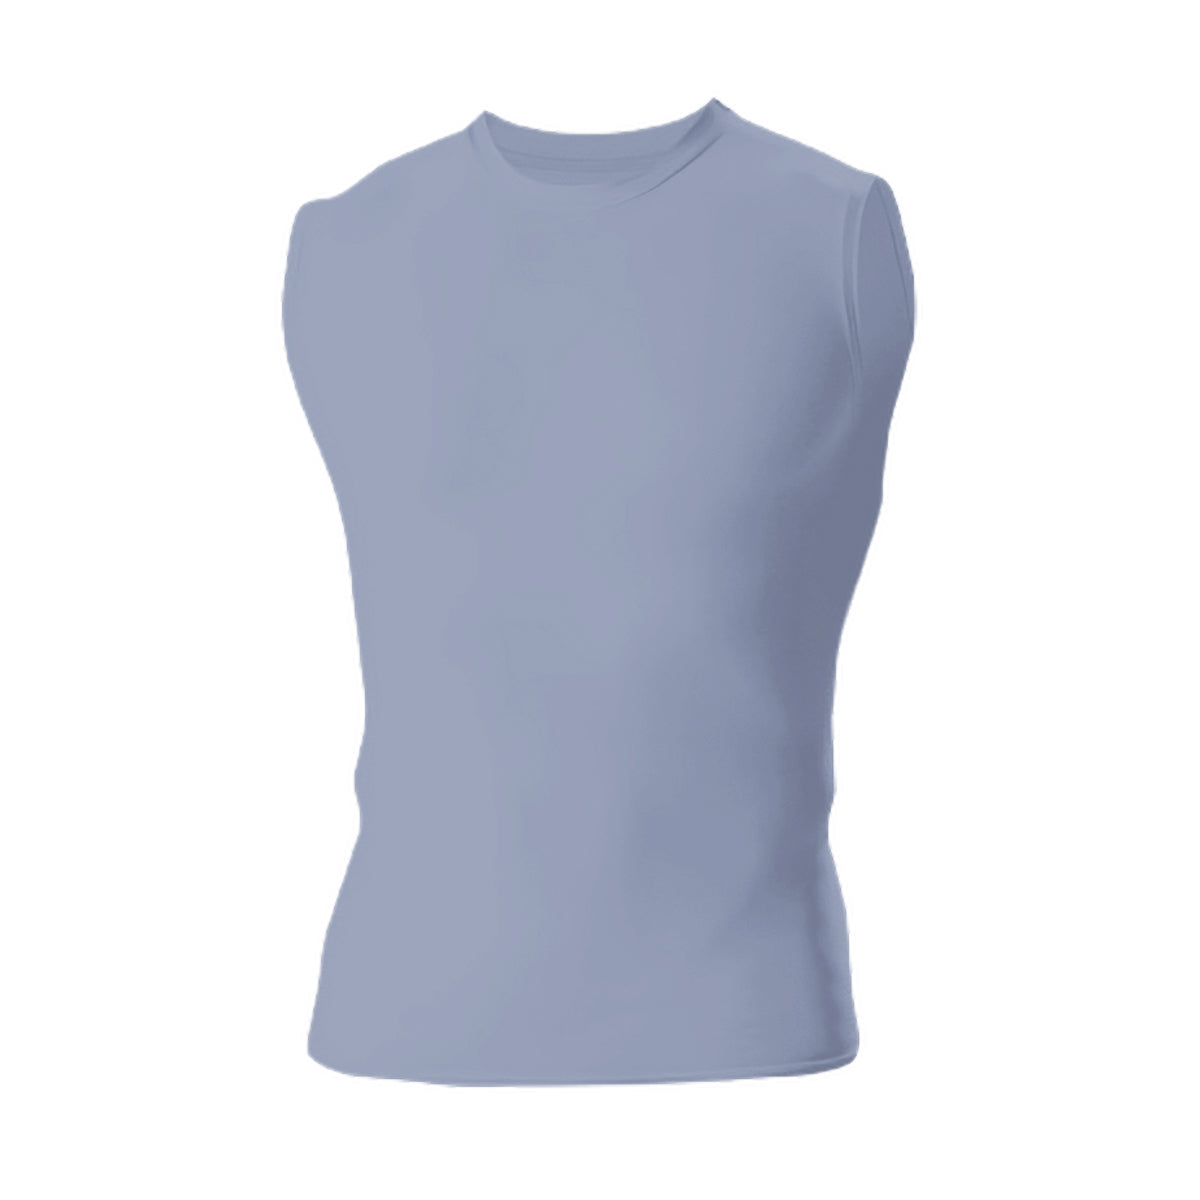 HercShirt 3.0 Max - The World's Cleanest Tank Top